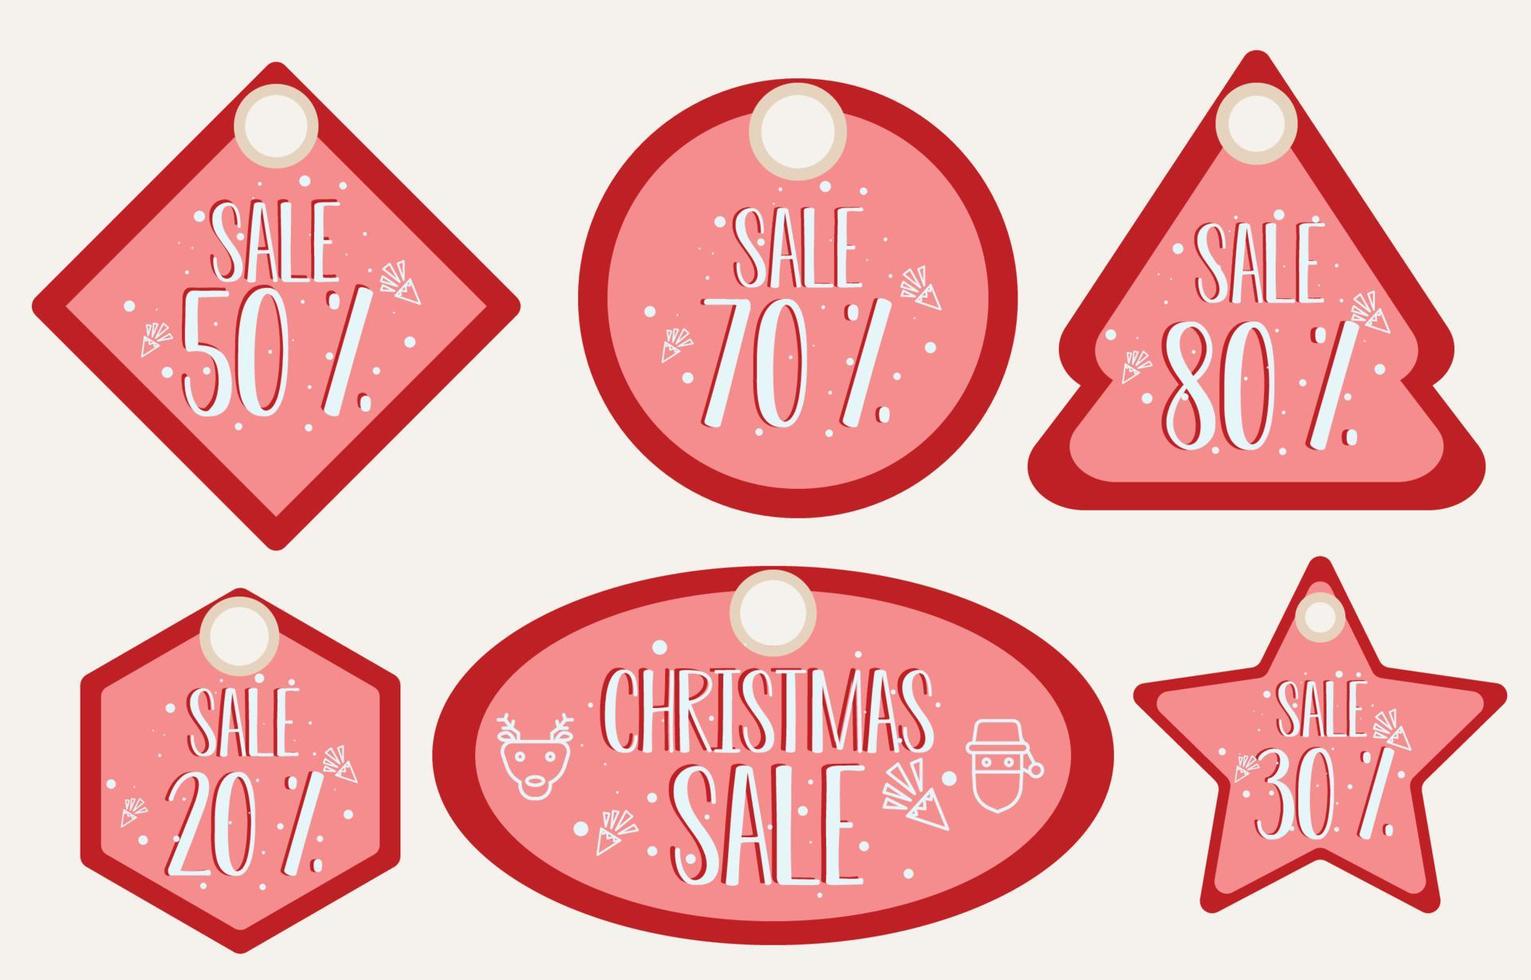 Vector red christmas sale paper price tag, circle shape and red square and snow hand drawn elements, hanging with discount text for newyear shopping holiday promotion Vector illustration.